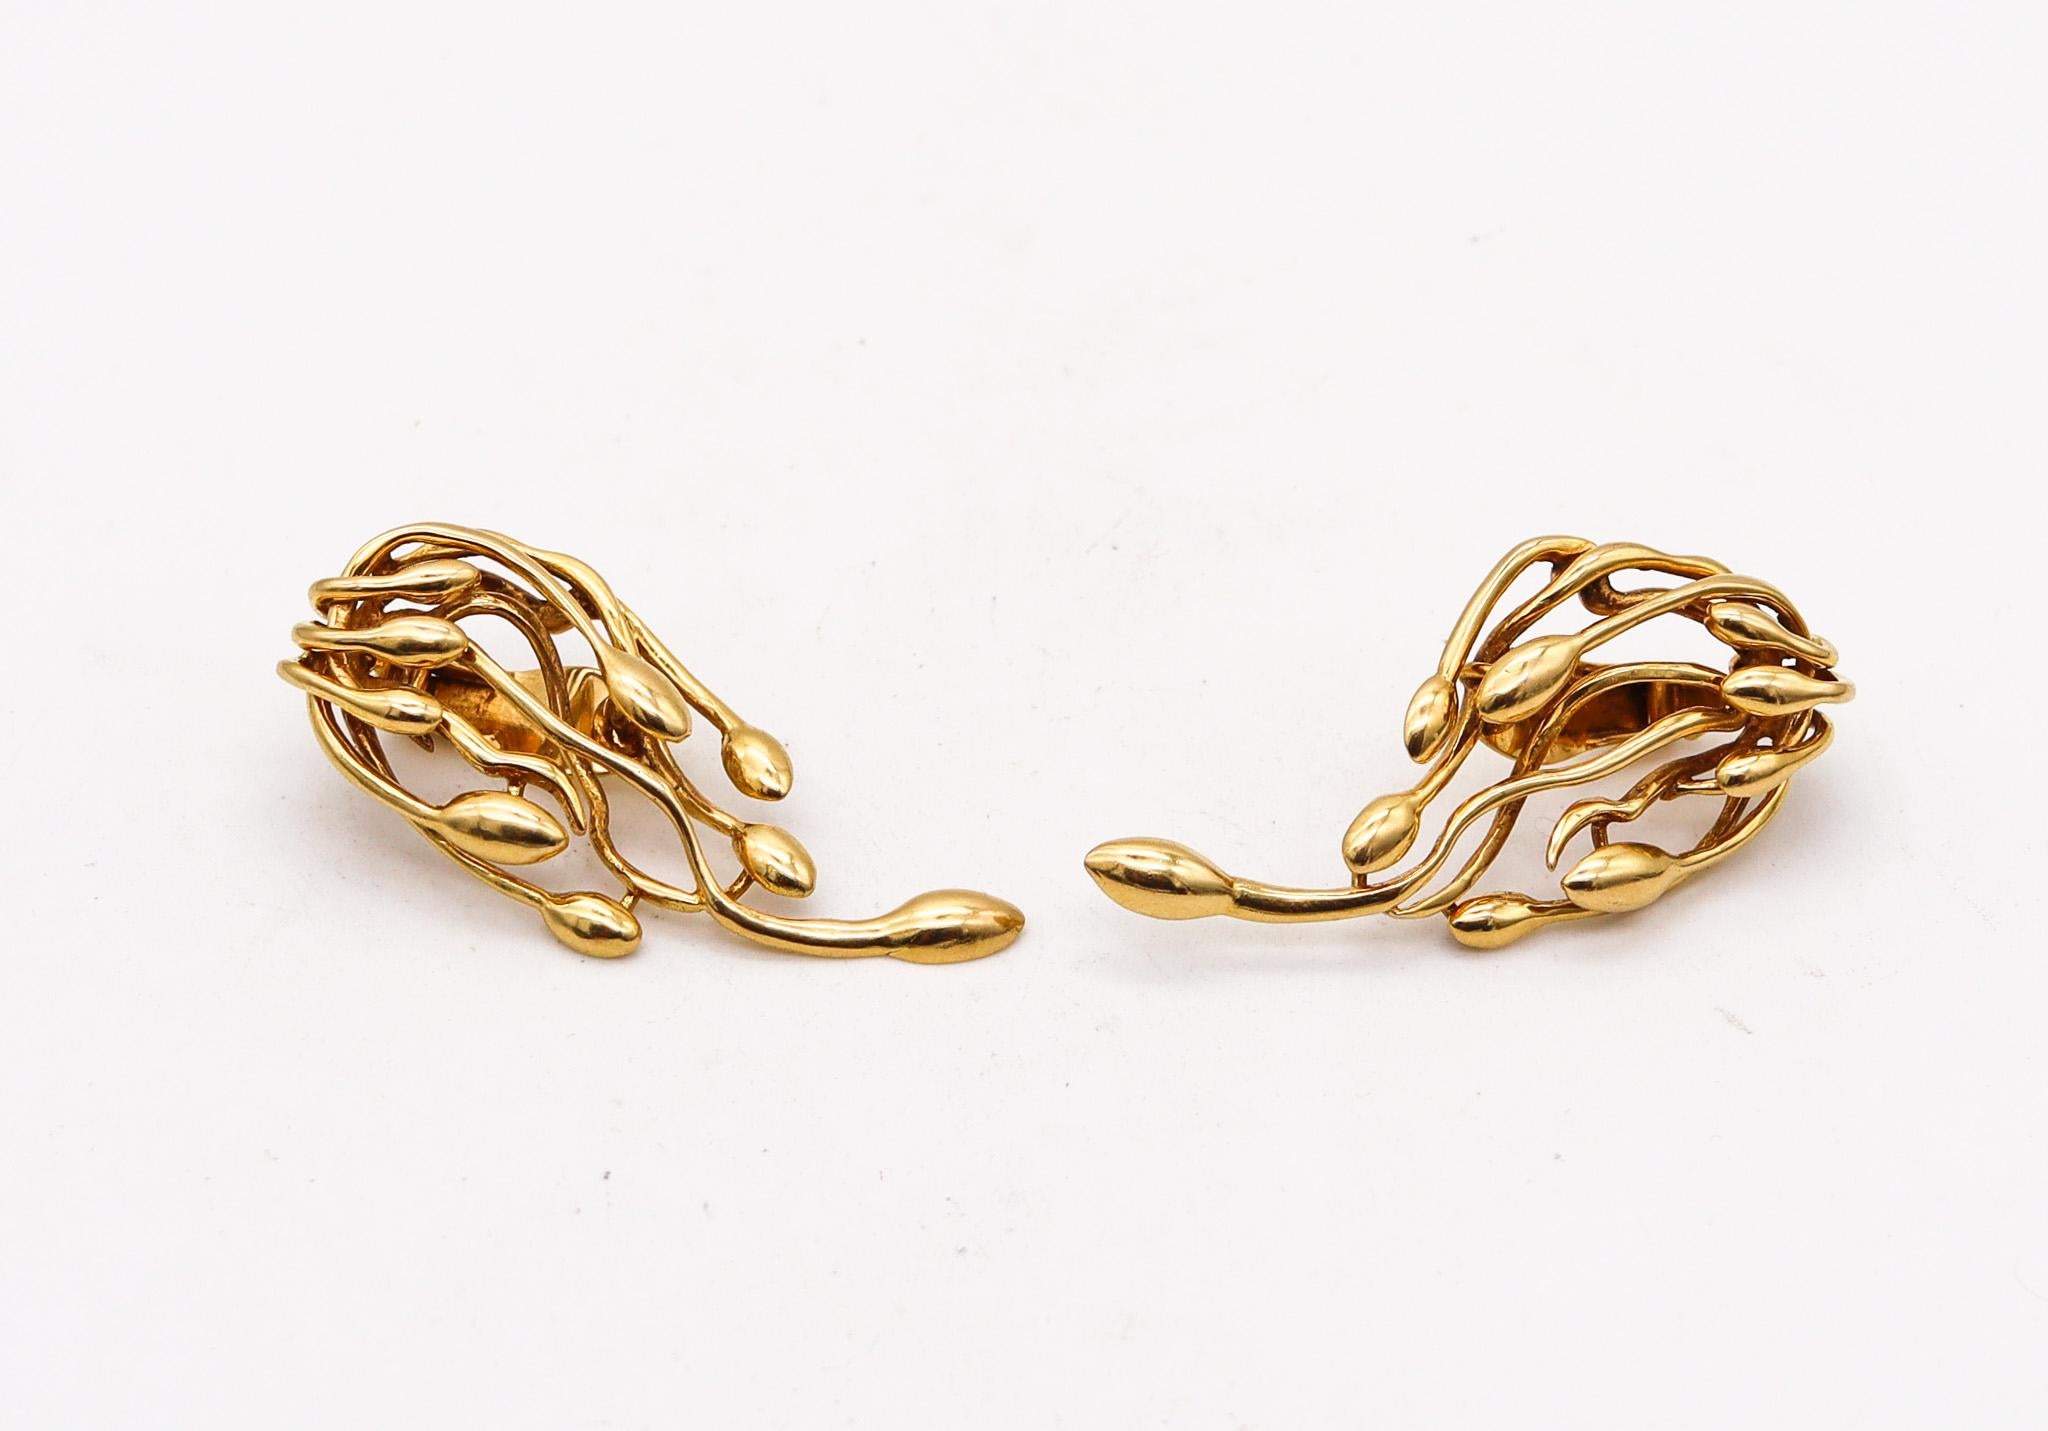 A pair of free form earrings designed by Ilias Lalaounis.

Statement pair of clips-on earrings, created in Paris France by the jewelry house of Ilias Lalaounis back in the early 1970. These beautiful vintage pieces are from the Biosymbols collection